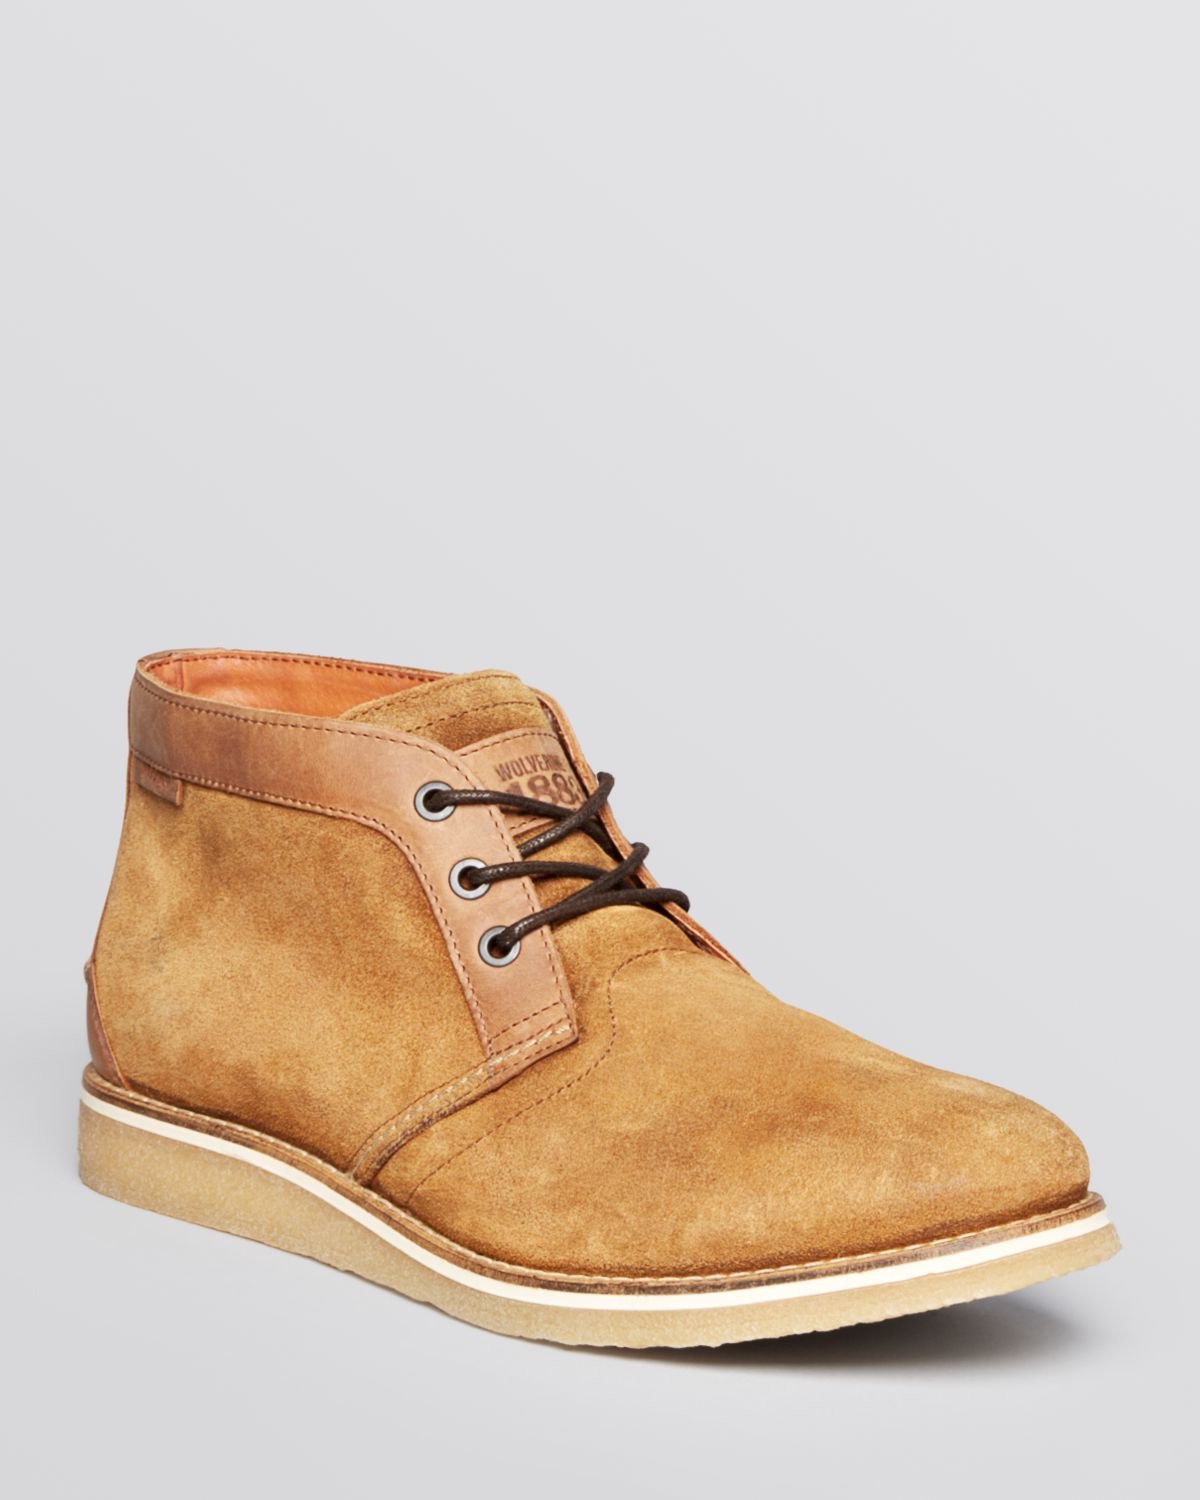 Lyst - Wolverine Julian Suede Chukka Boots in Brown for Men